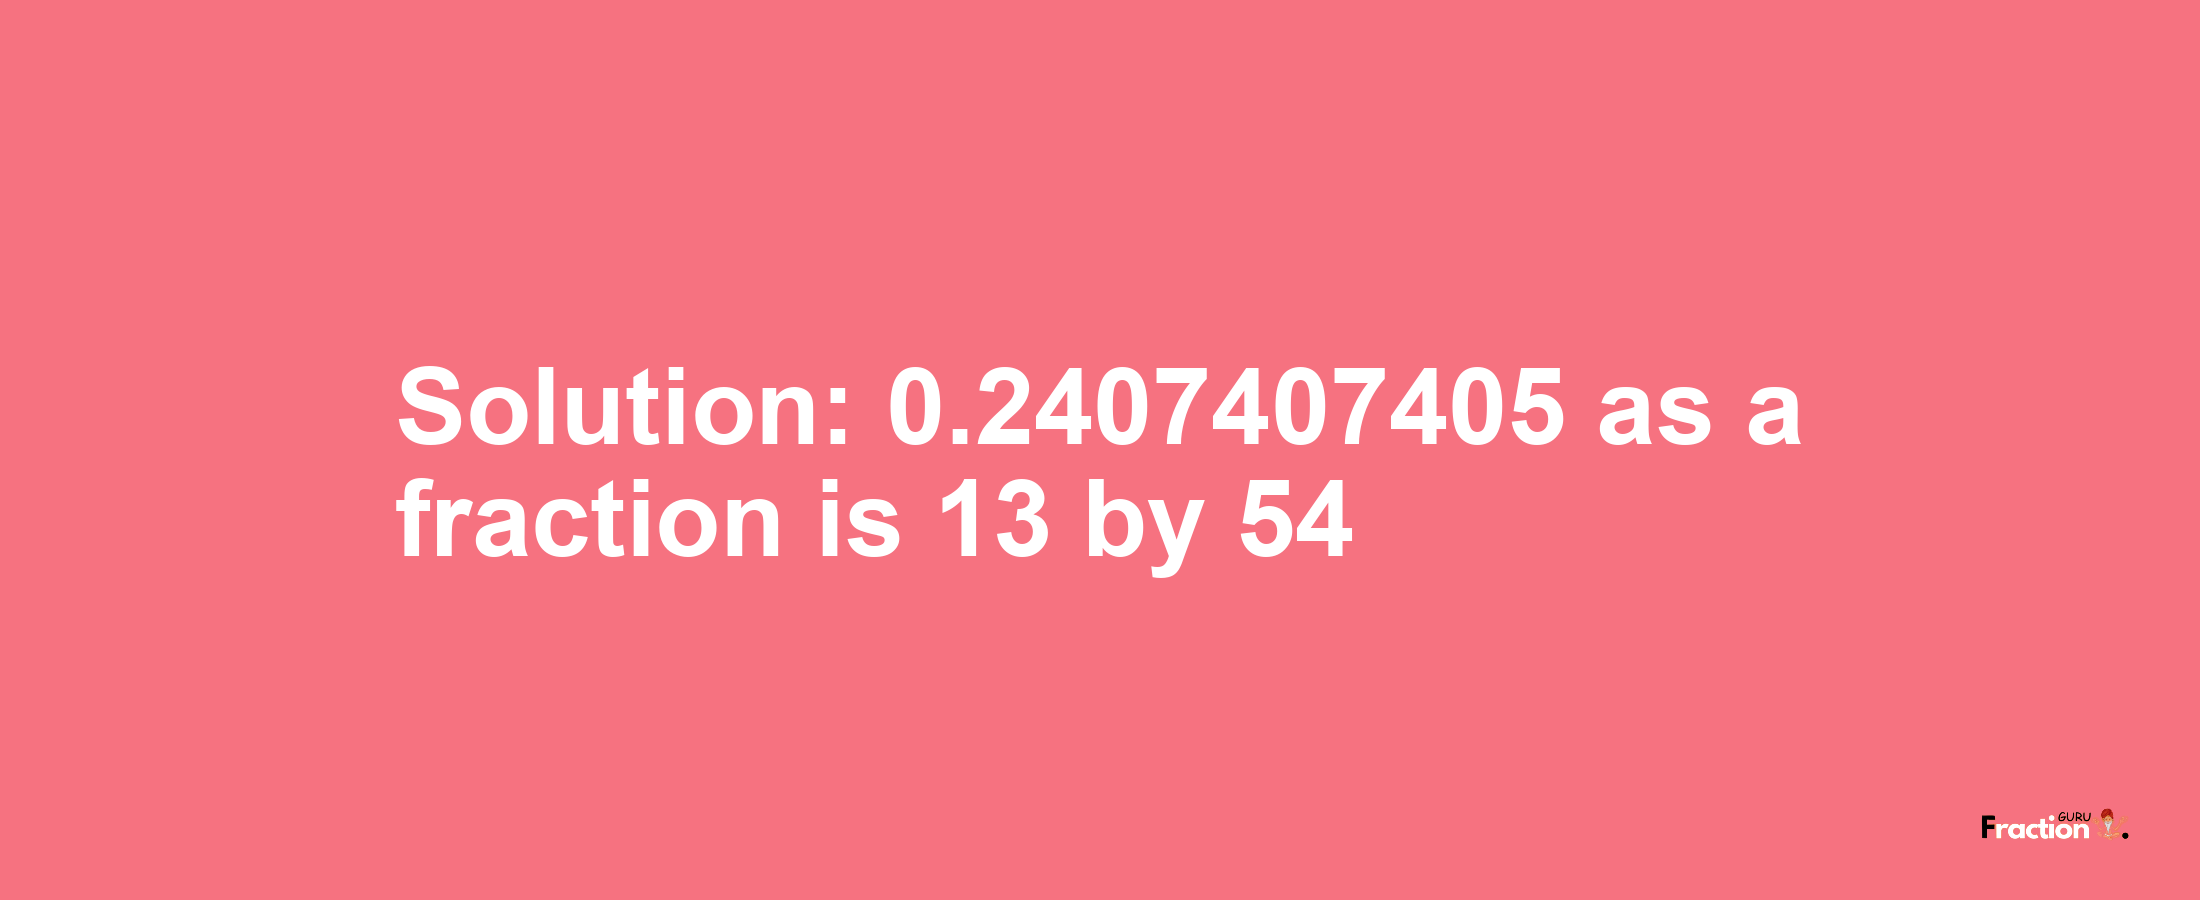 Solution:0.2407407405 as a fraction is 13/54